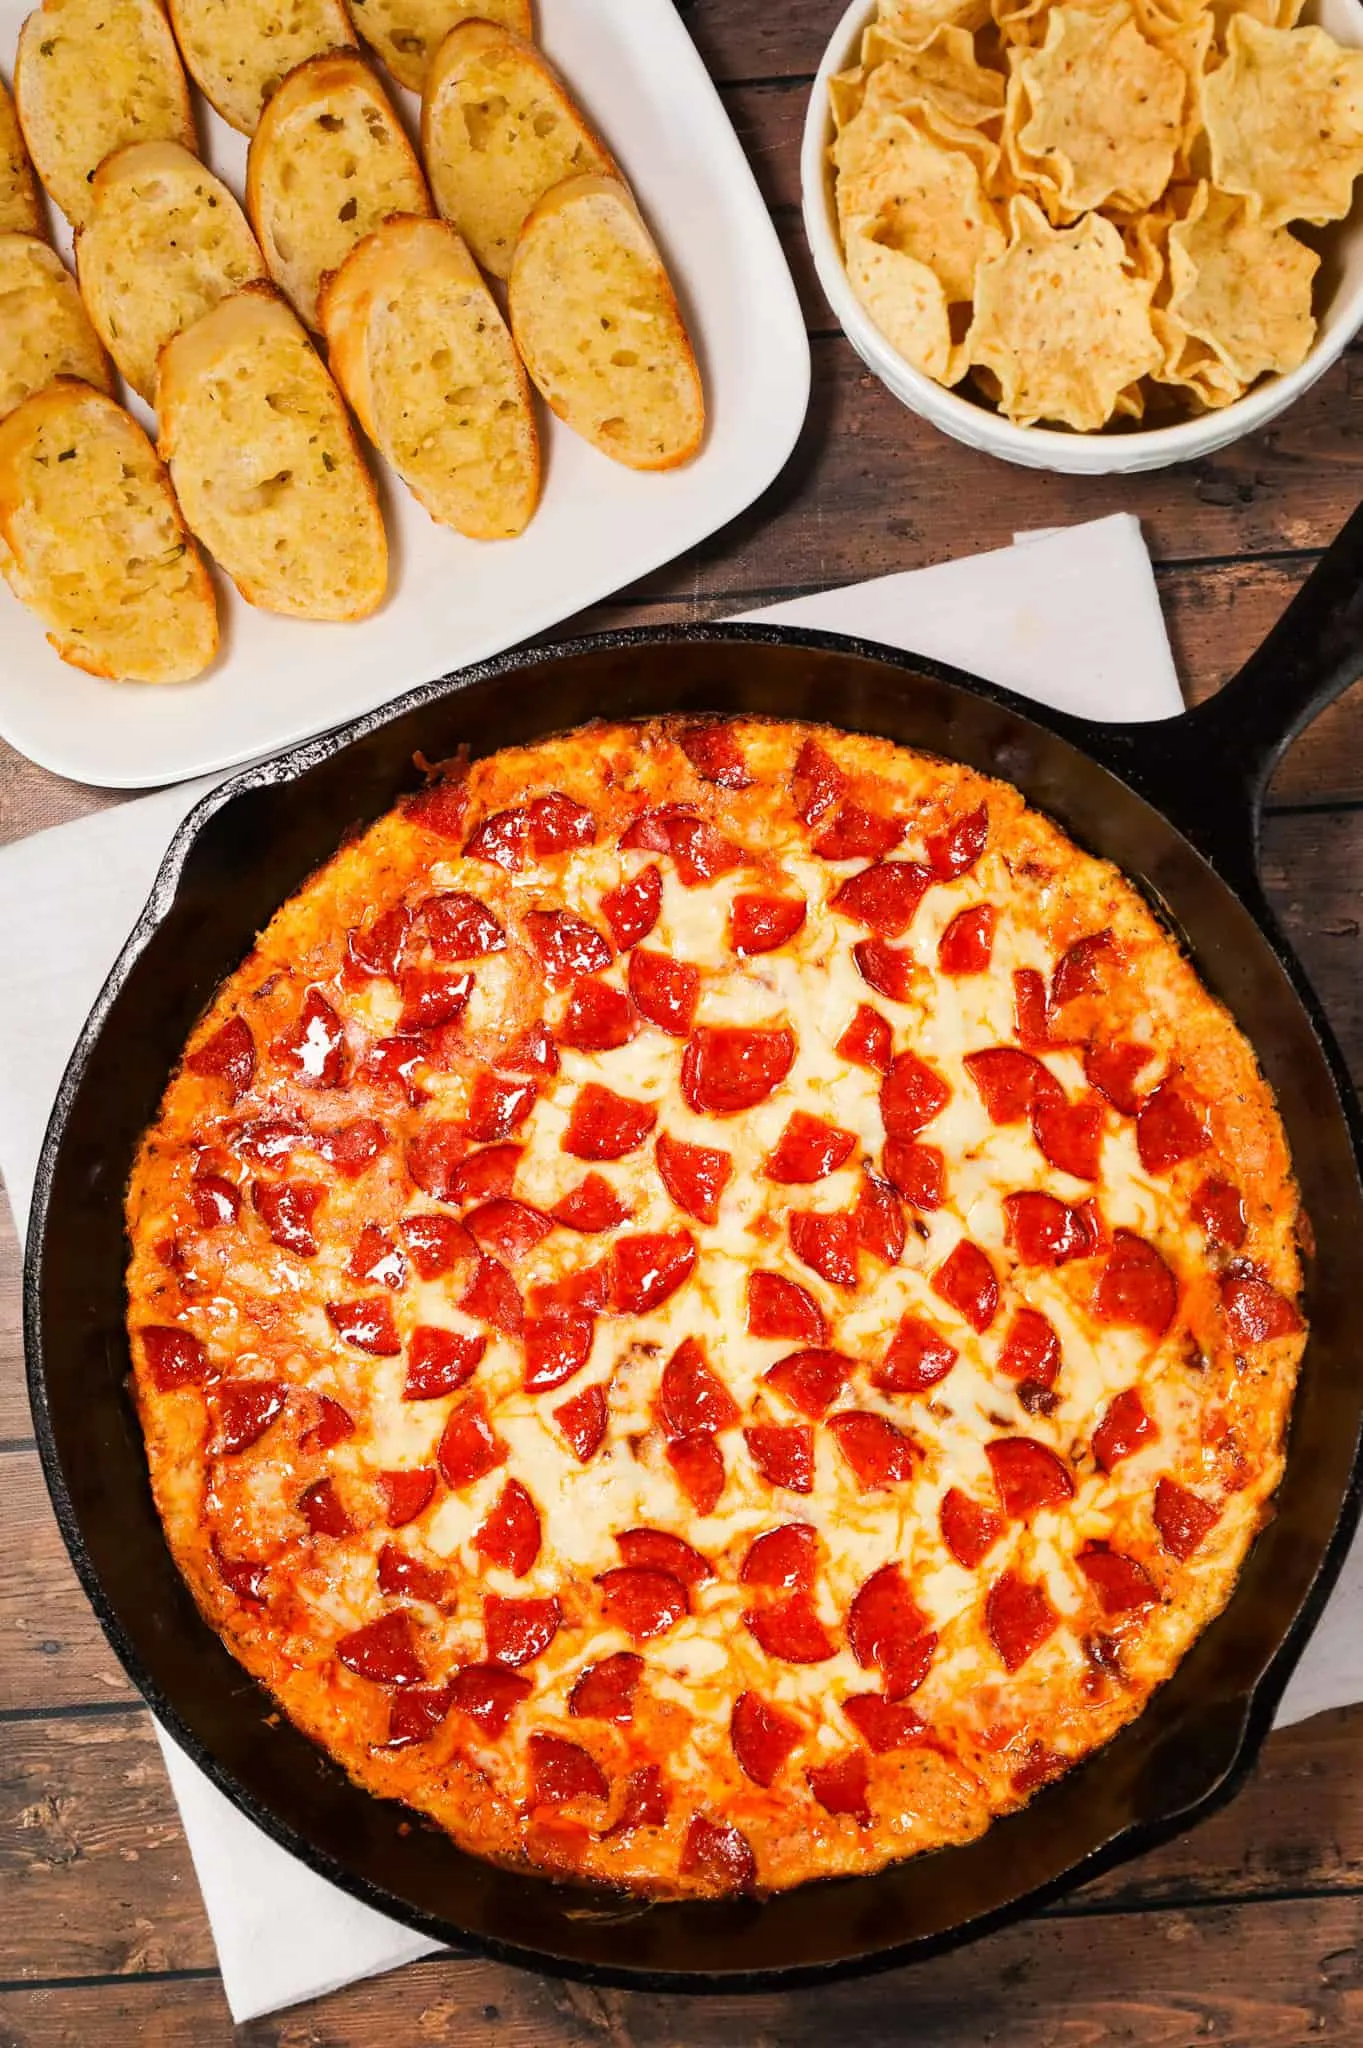 Pepperoni Dip is a delicious hot dip recipe made with cream cheese, ranch dressing, Italian seasoning, pizza sauce, mozzarella cheese, parmesan cheese and chopped pepperoni.